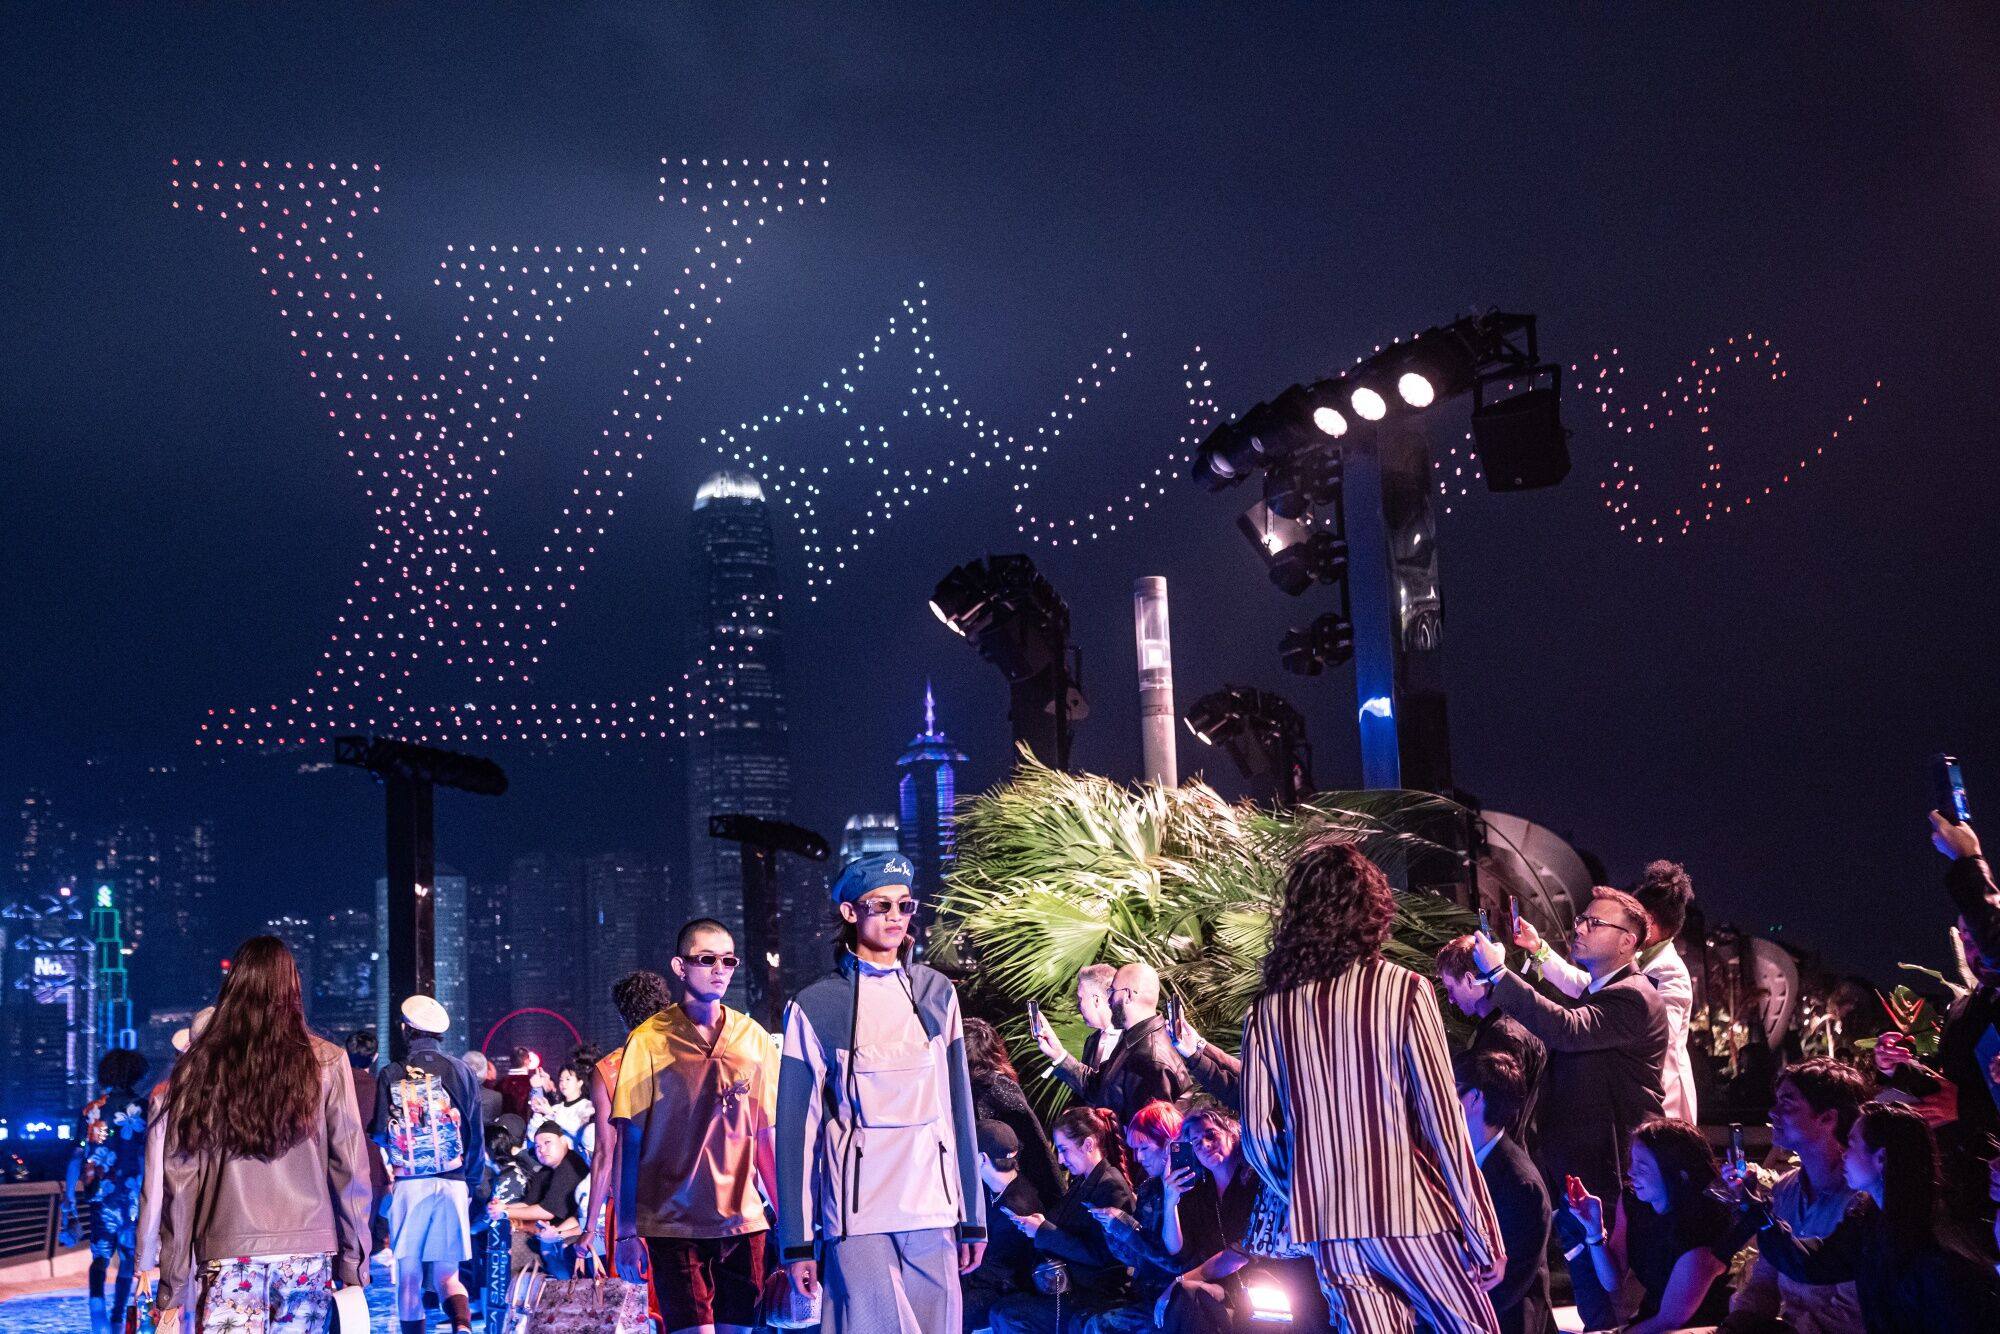 Drones display Louis Vuitton’s logo during the brand’s invitation-only fashion show held on the Avenue of Stars in Hong Kong on November 30. Accessible luxury retailers are having to contend with shifts in local consumption patterns, as well as exclusivity strategies by luxury brands. Photo: Bloomberg 